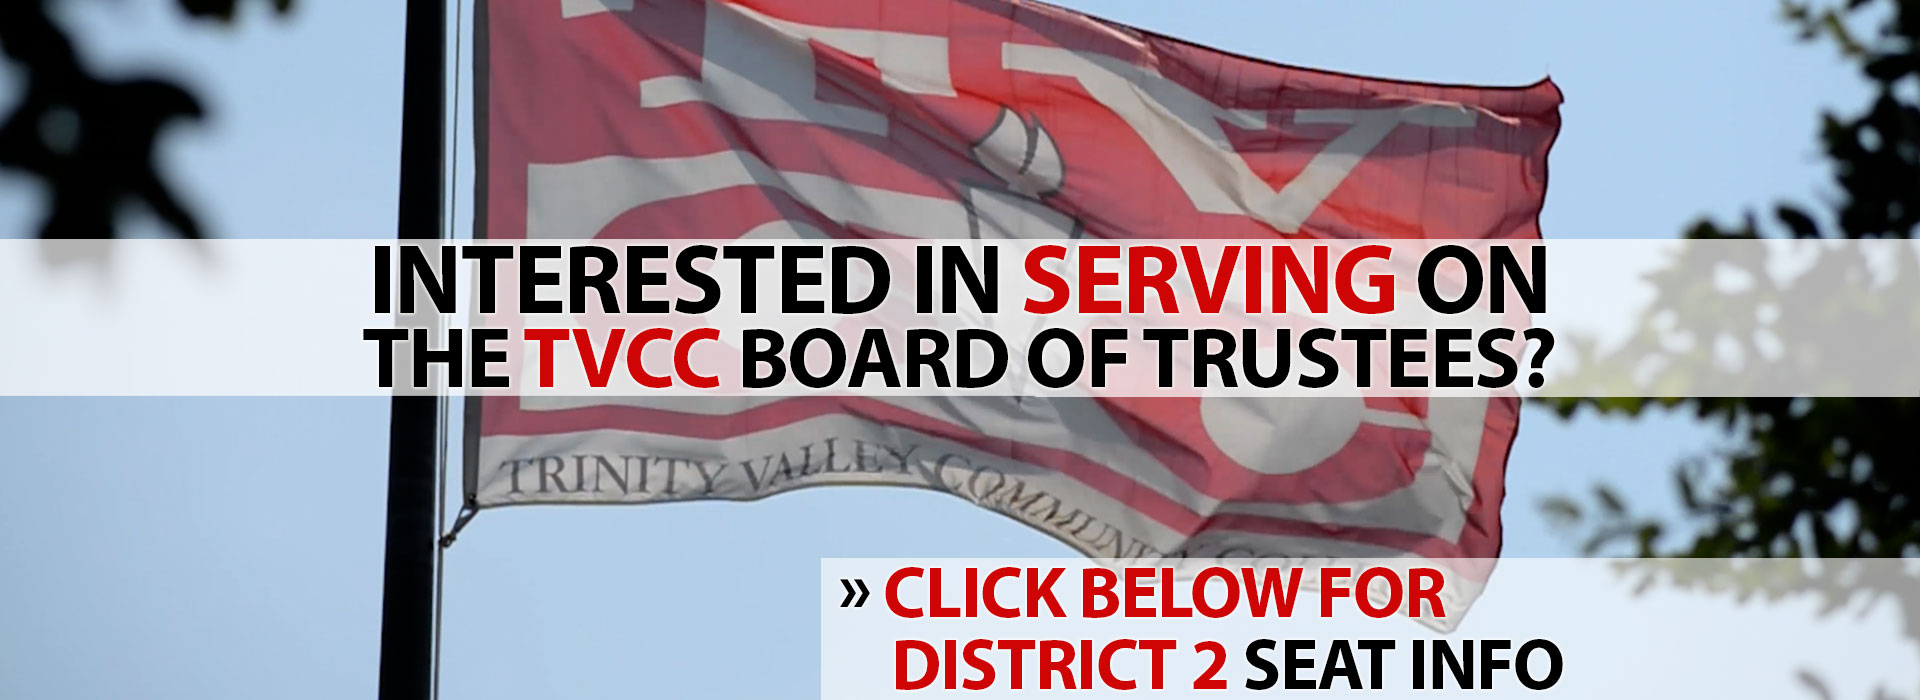 Interested in serving on the TVCC Board of Trustees?  Click below for District 2 seat info.